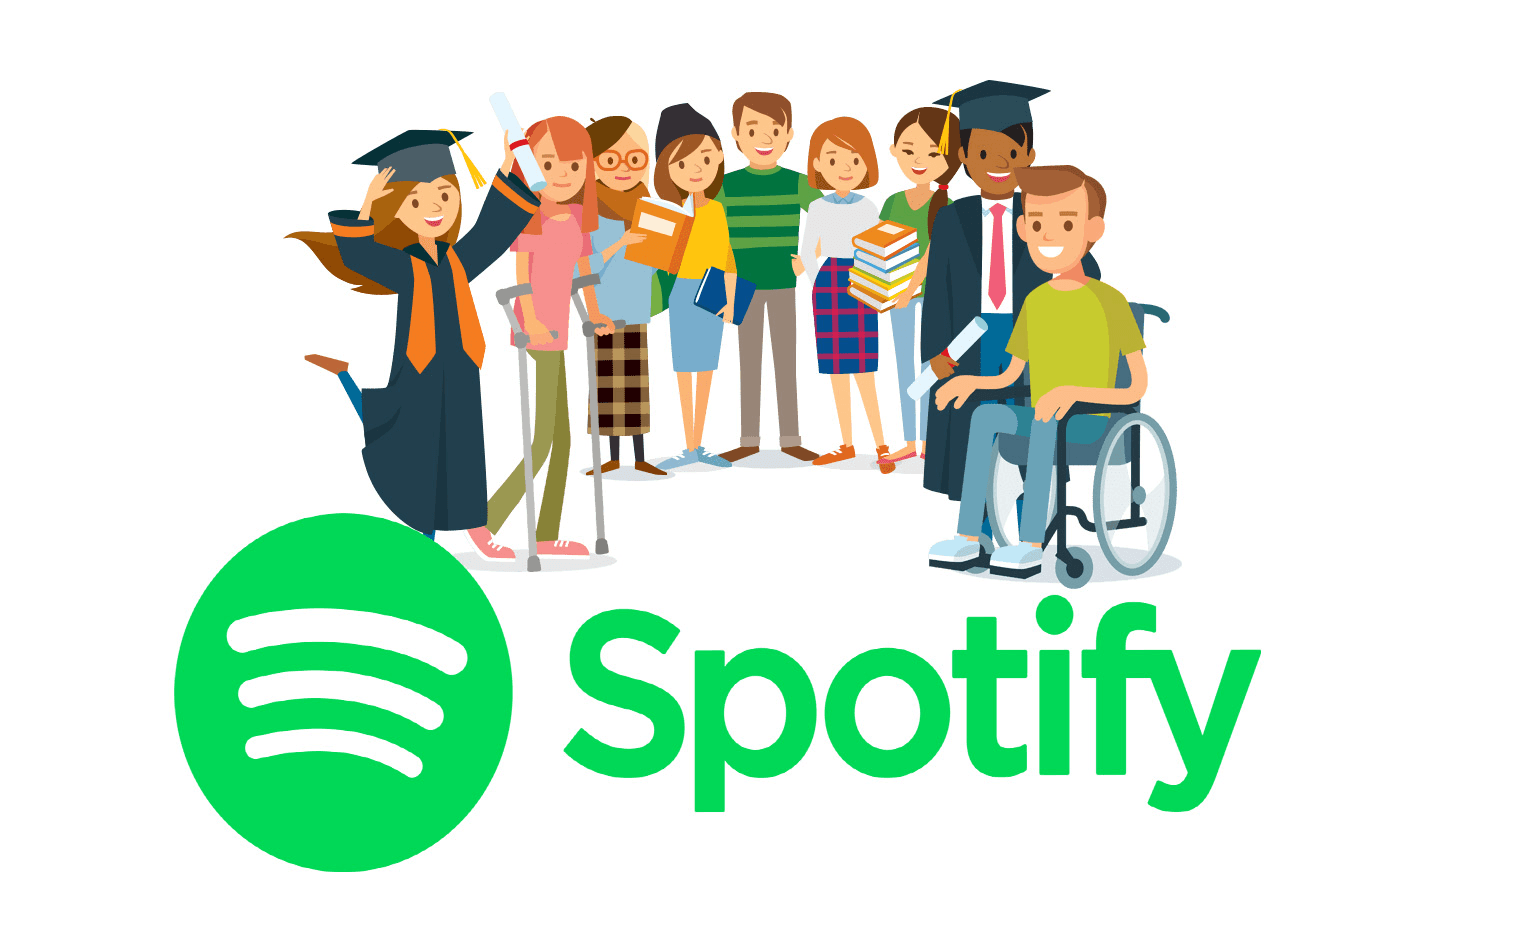 If you are starting College in the Fall, switch to a student account to get Spotify discounted